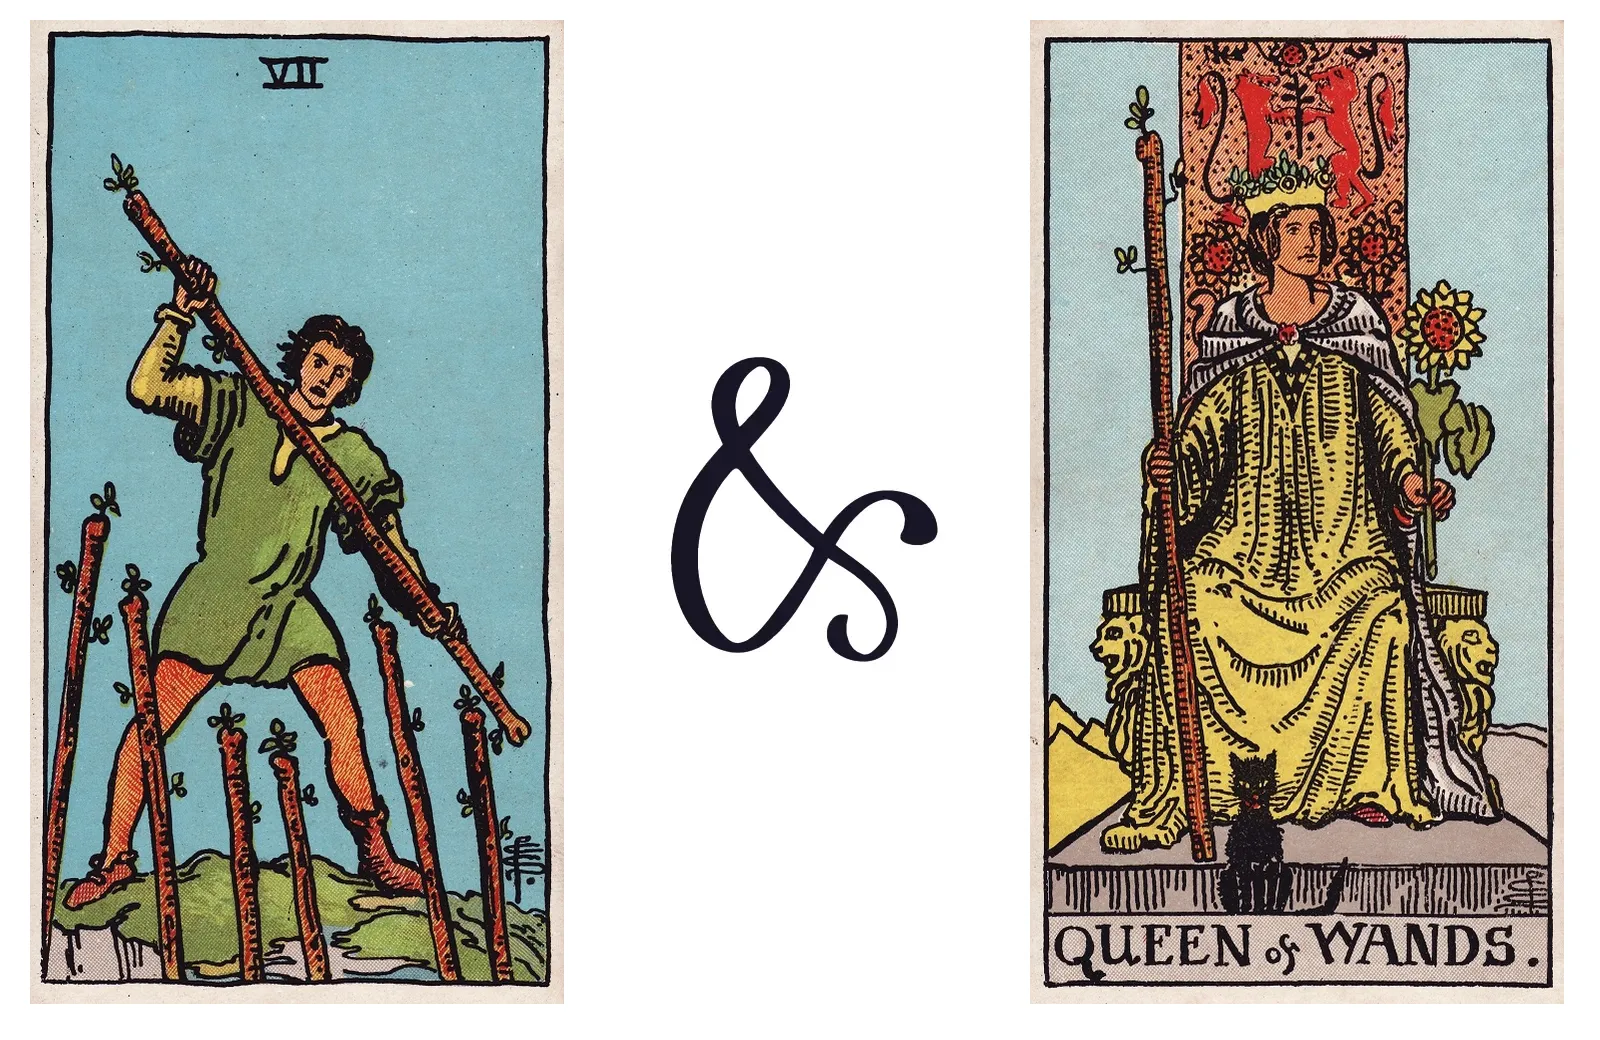 Seven of Wands and Queen of Wands